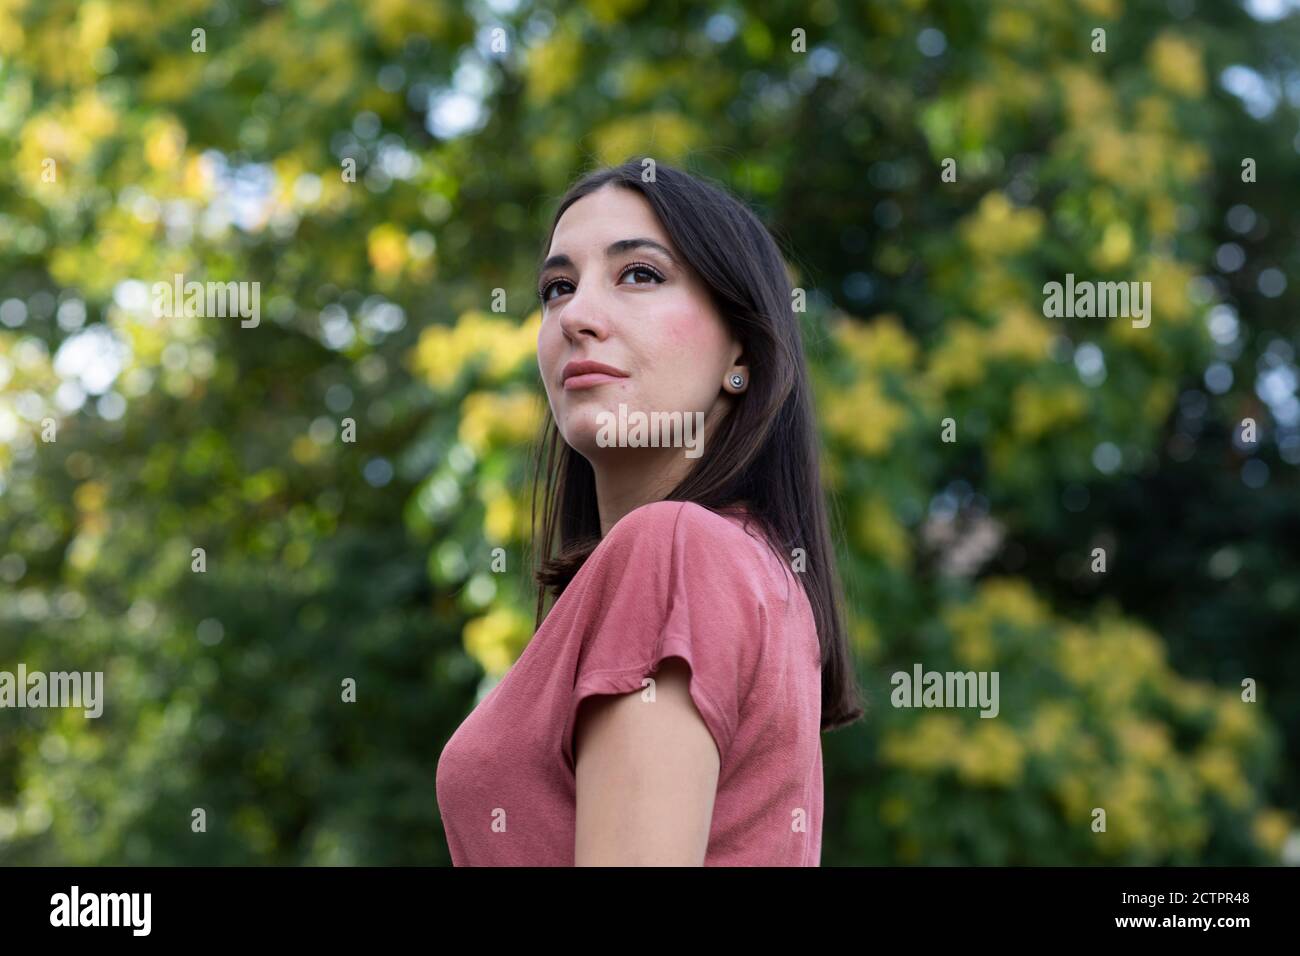 Woman wearing dusty pink top and standing outdoors Stock Photo